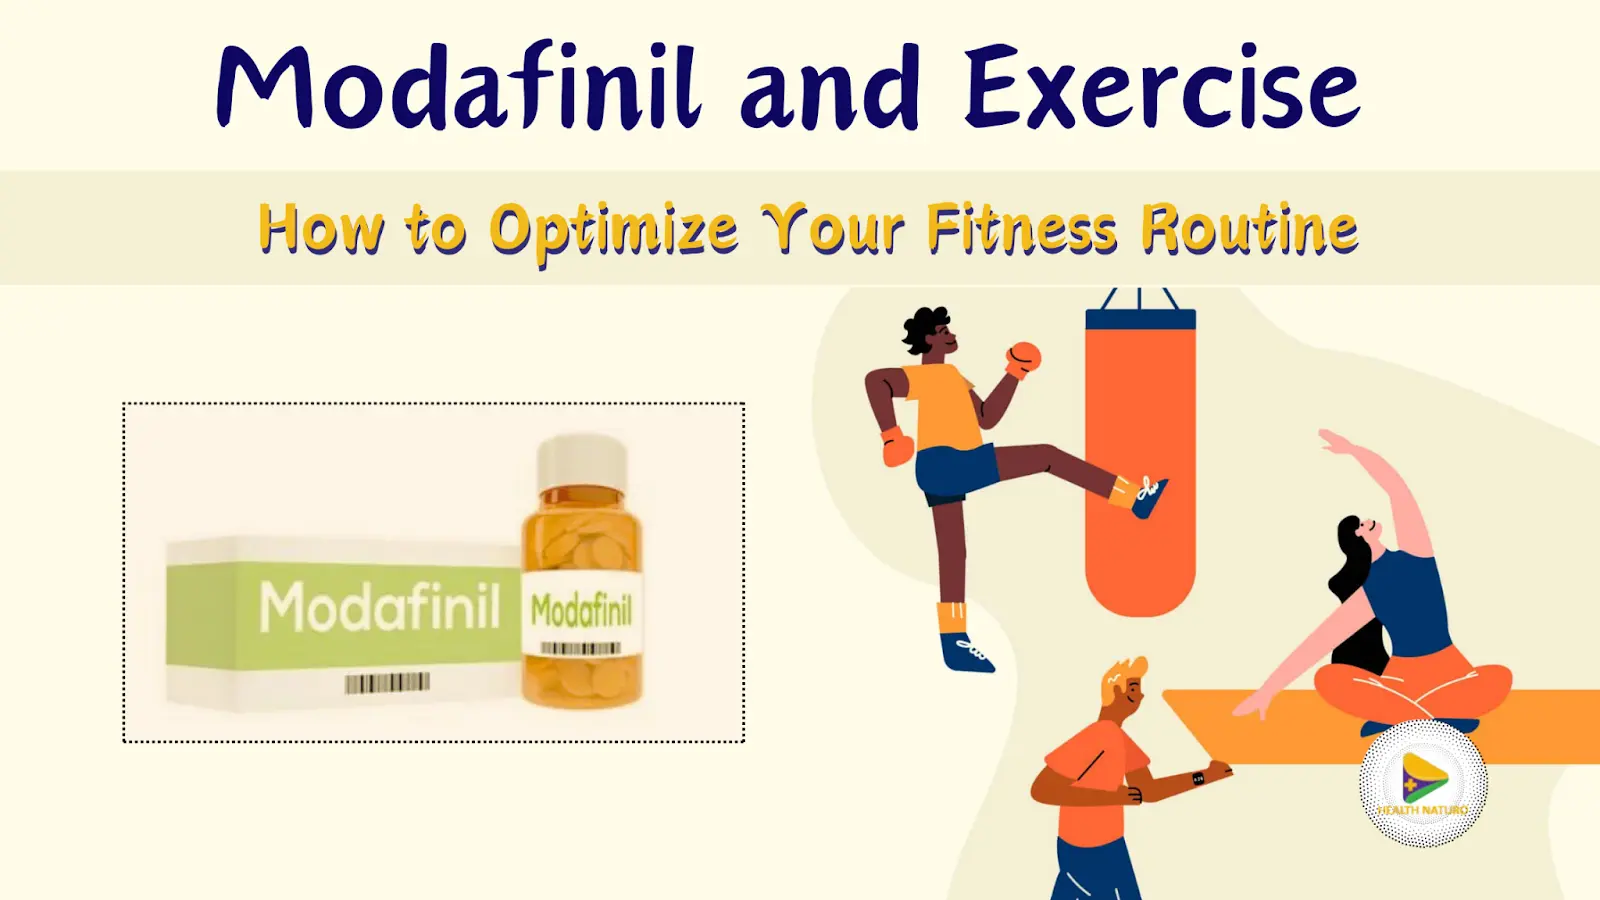 Modafinil and Exercise: How to Optimize Your Fitness Routine